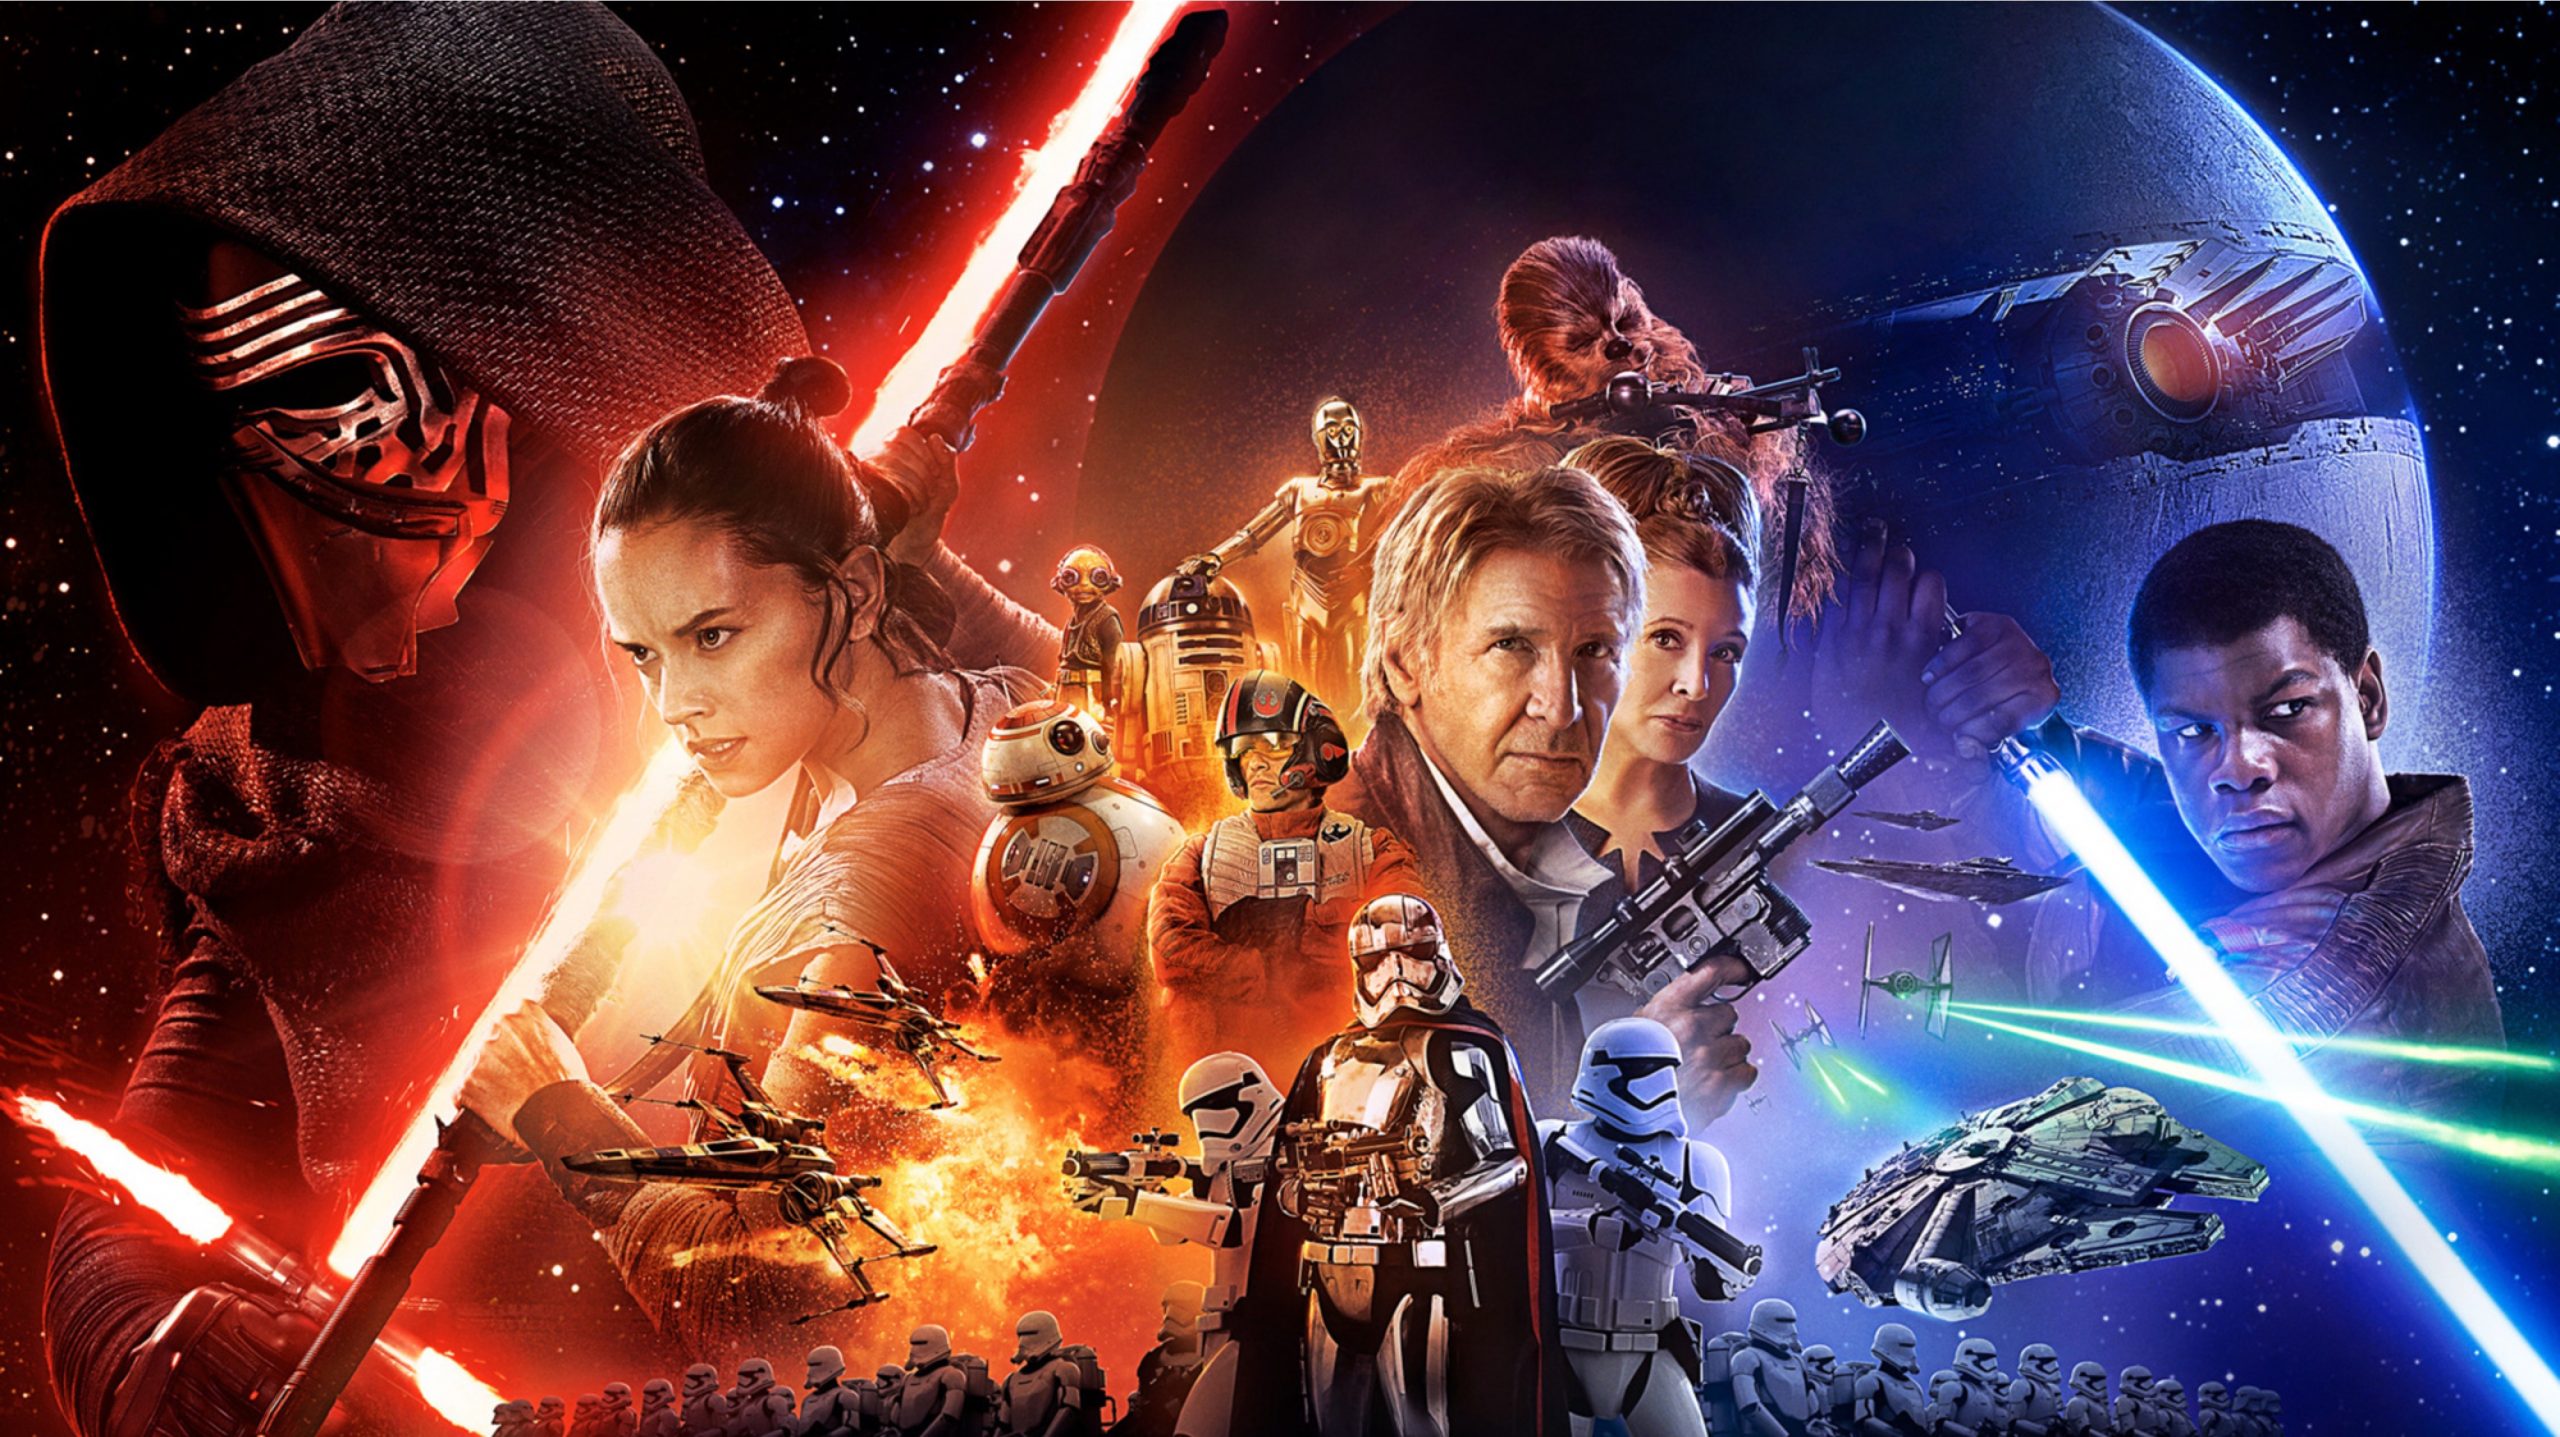 Star Wars the Force Awakens Review